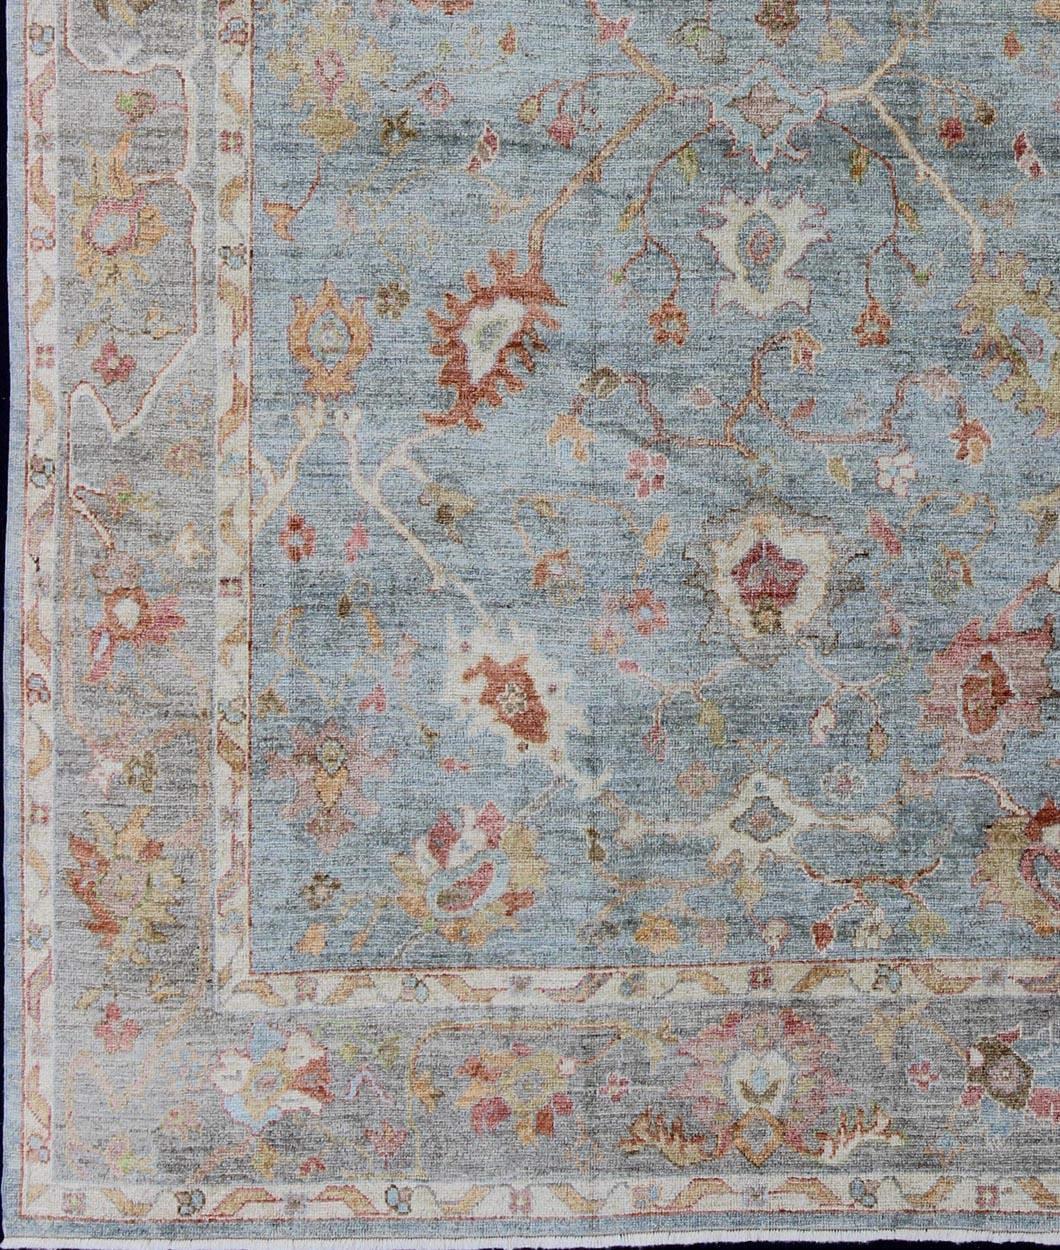 Silver, red, light blue and silver Angora Oushak rug from Turkey. Keivan Woven Arts /  rug AN-134592, country of origin / type: Turkey / Angora Oushak 
Measures: 9'3 x 12'5.
From our Angora collection, this piece is made with a combination of angora